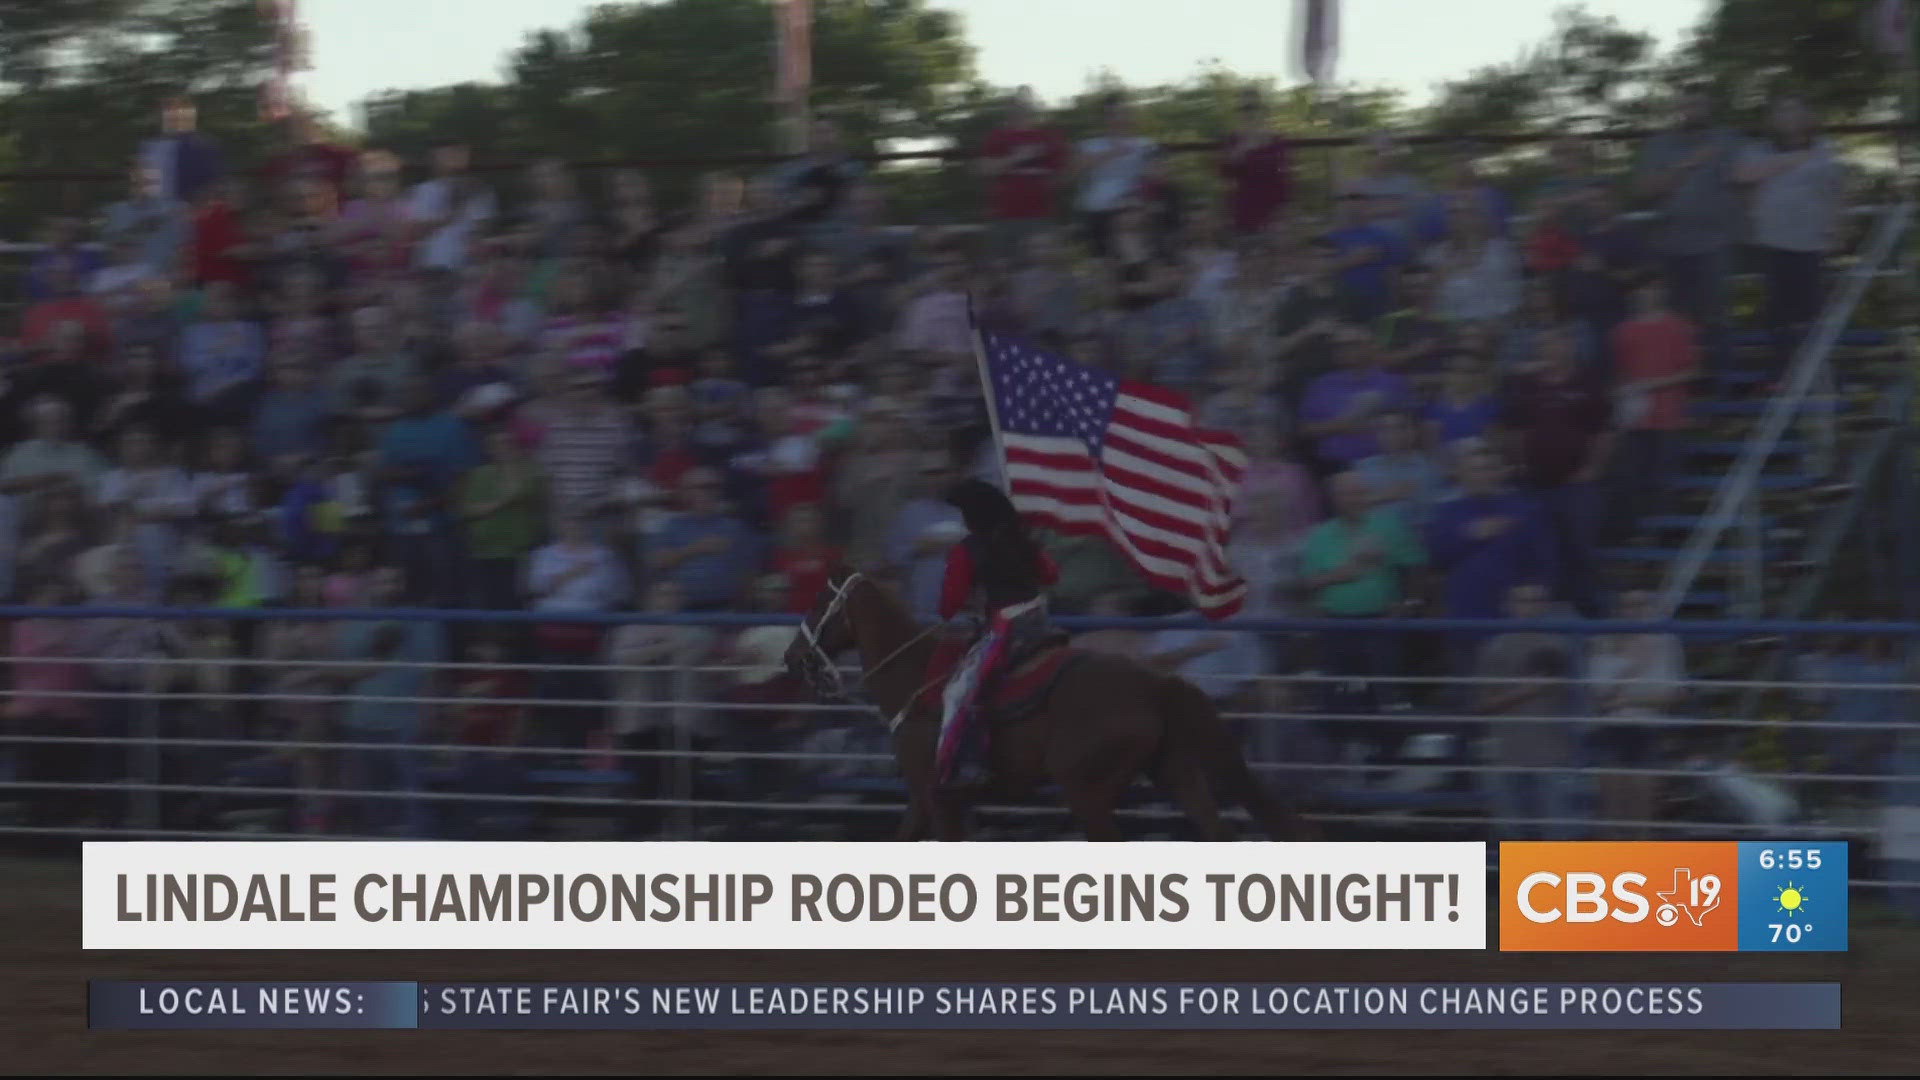 The Lindale Championship Rodeo is celebrating 37 years this weekend!